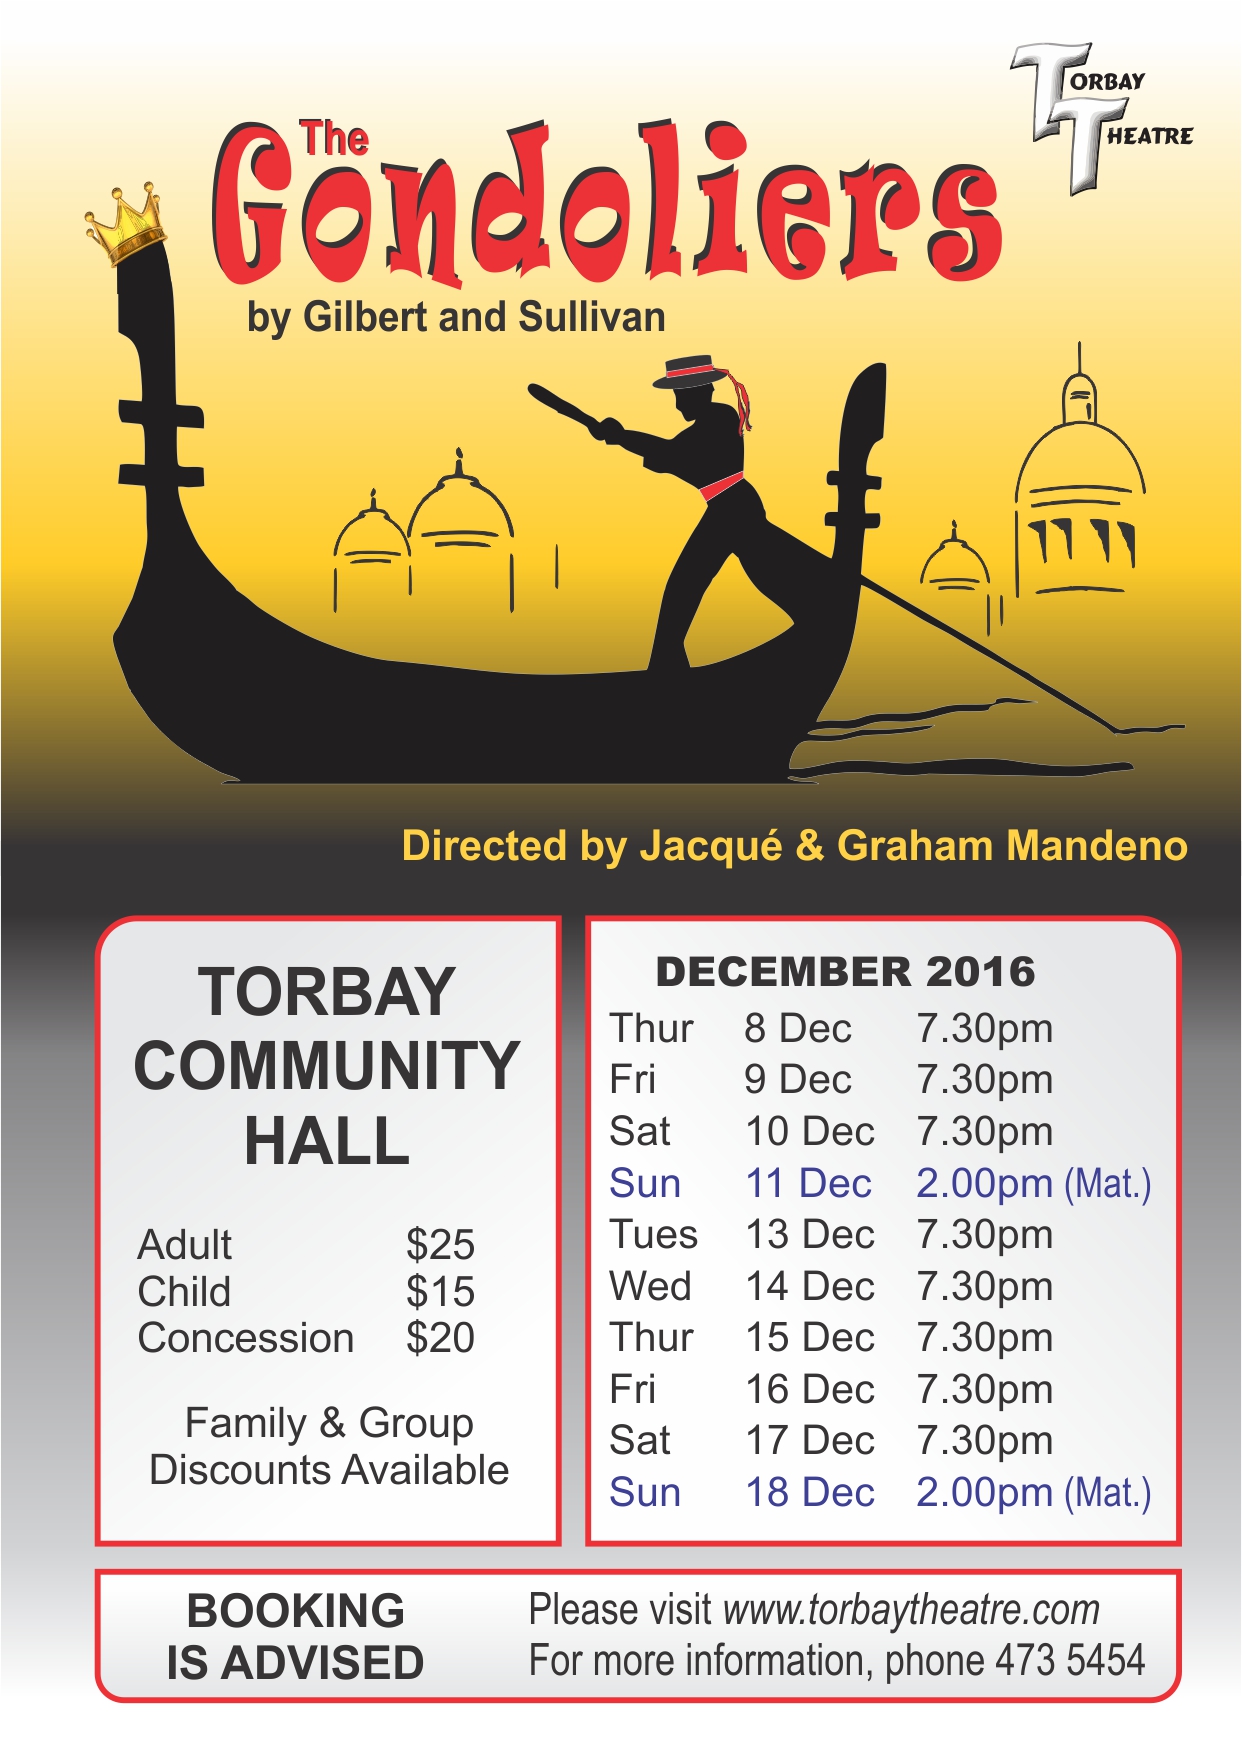 The Gondoliers by Gilbert and Sullivan Directedby Jacqué & Graham Mandeno Design by Tony Nettleton tony@netart.co.nz Print sponsored by Leo & Kyra Perwick Barfoot & Thompson Torbay, 473 8741 DECEMBER 2016 Thur 8 Dec 7.30pm Fri 9 Dec 7.30pm Sat 10 Dec 7.30pm Sun 11 Dec 2.00pm (Mat.) Tues 13 Dec 7.30pm Wed 14 Dec 7.30pm Thur 15 Dec 7.30pm Fri 16 Dec 7.30pm Sat 17 Dec 7.30pm Sun 18 Dec 2.00pm (Mat.) TORBAY COMMUNITY HALL  Adult $25 Child $15 Concession $20 Family & Group Discounts Available BOOKING IS ADVISED Please visit www.torbaytheatre.com For more information, phone 473 5454 